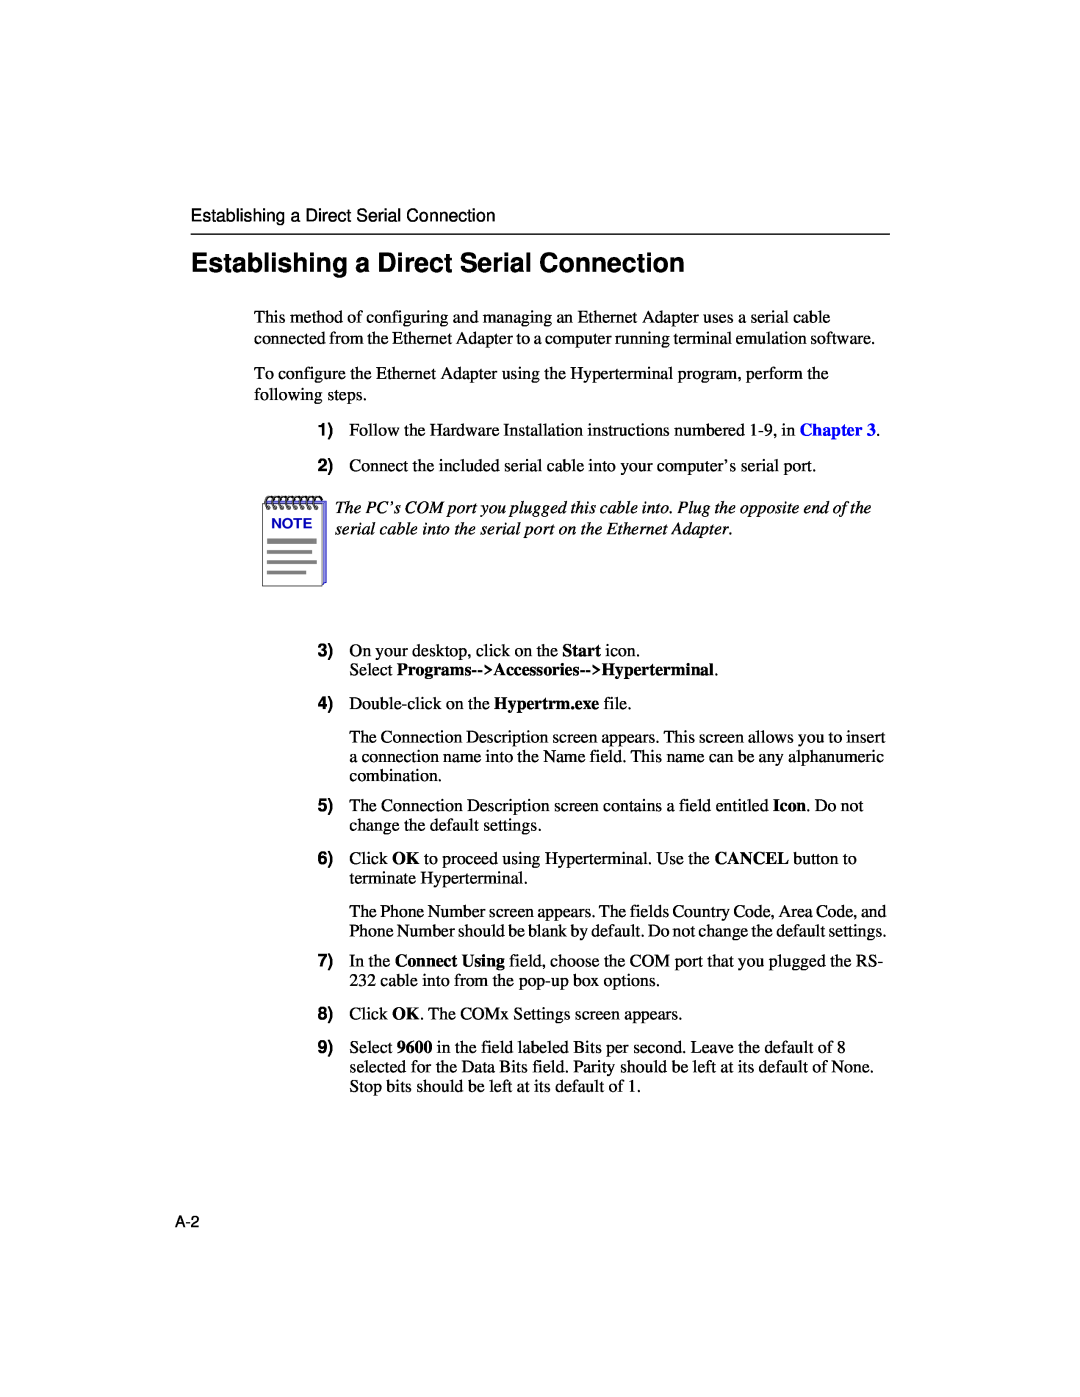 Enterasys Networks Wireless Ethernet Adapter I manual Establishing a Direct Serial Connection 